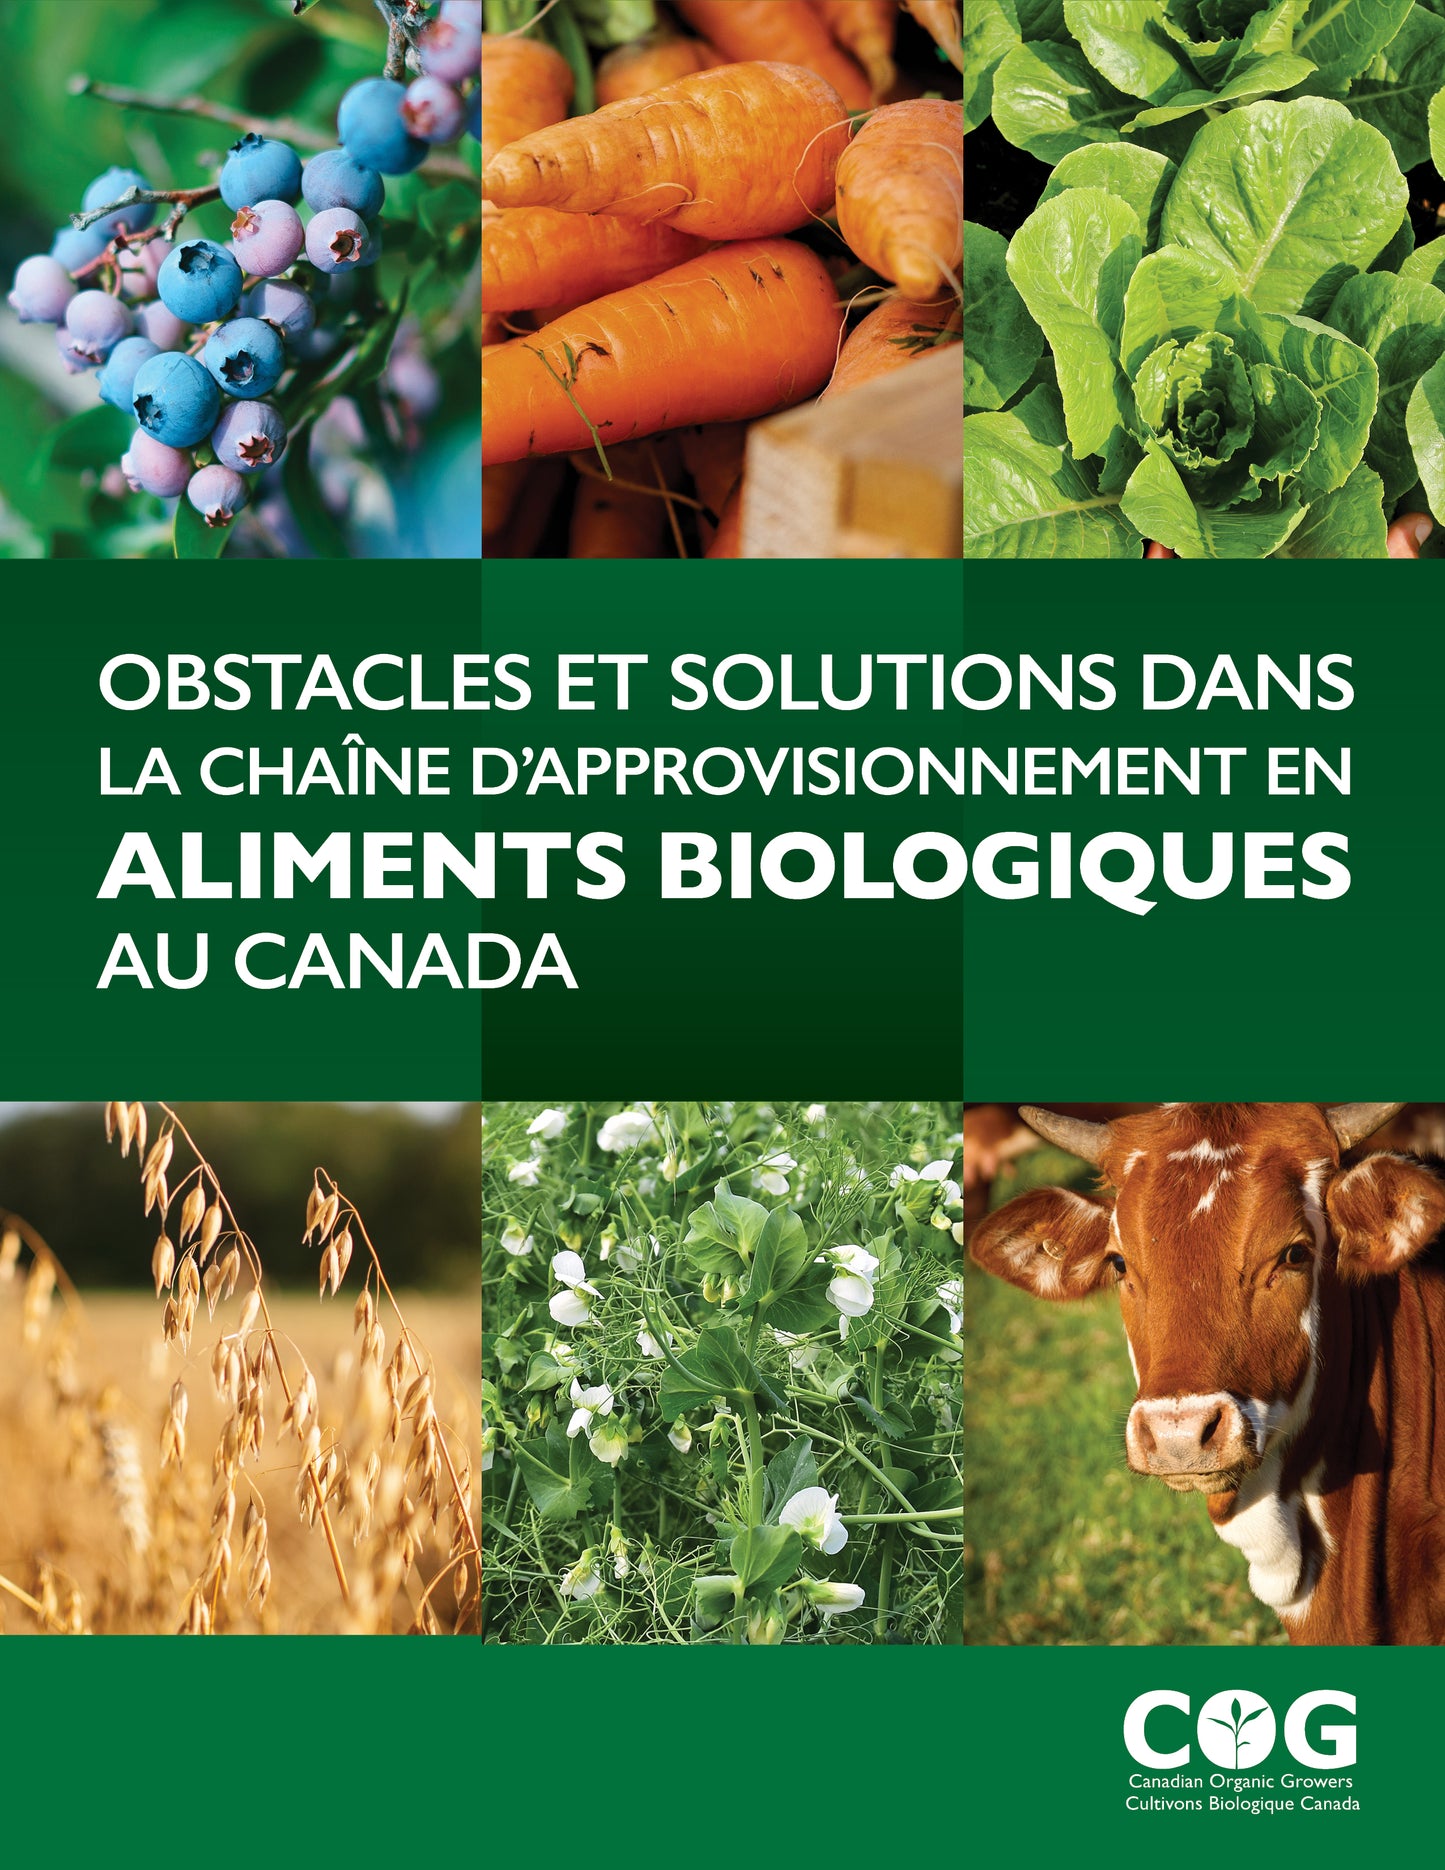 Barriers and Solutions in Canada’s Organic Food Supply Chain - Summary Report / Obstacles et solutions dans la chaîne d'approvisionnement en aliments biologique au Canada - Rapport de synthèse